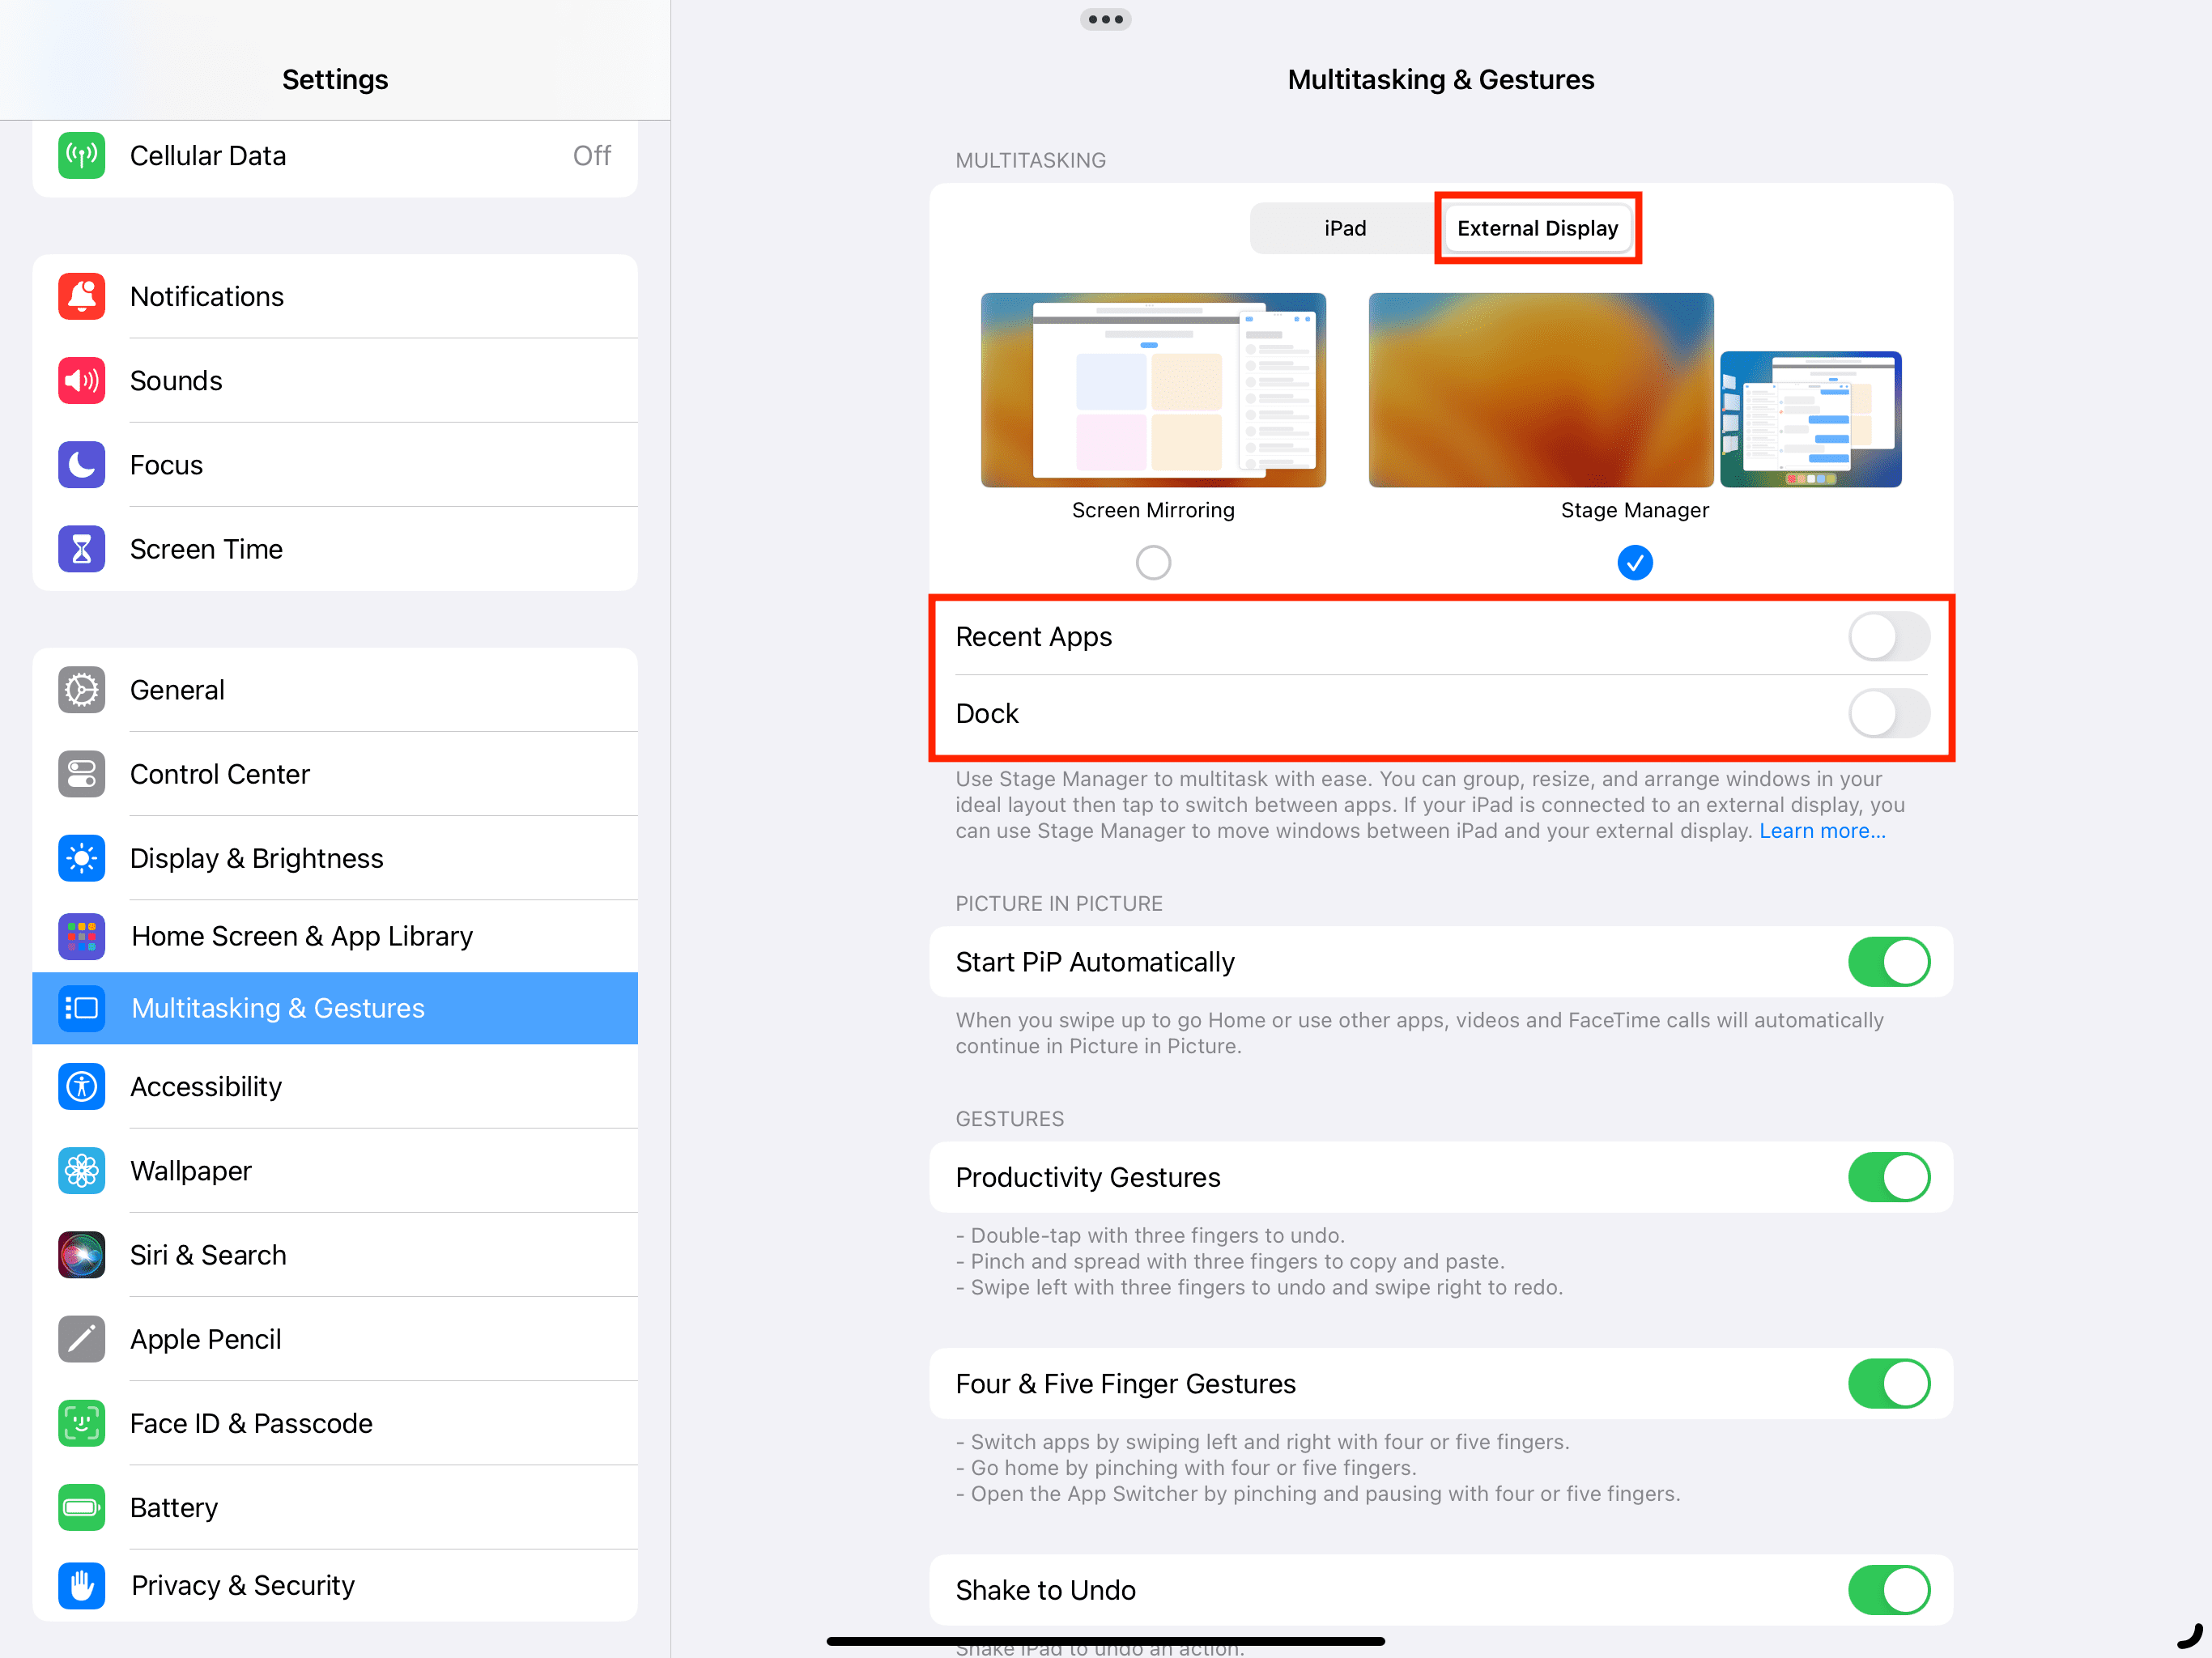 Turn off Recent Apps and Dock from external display connected to iPad